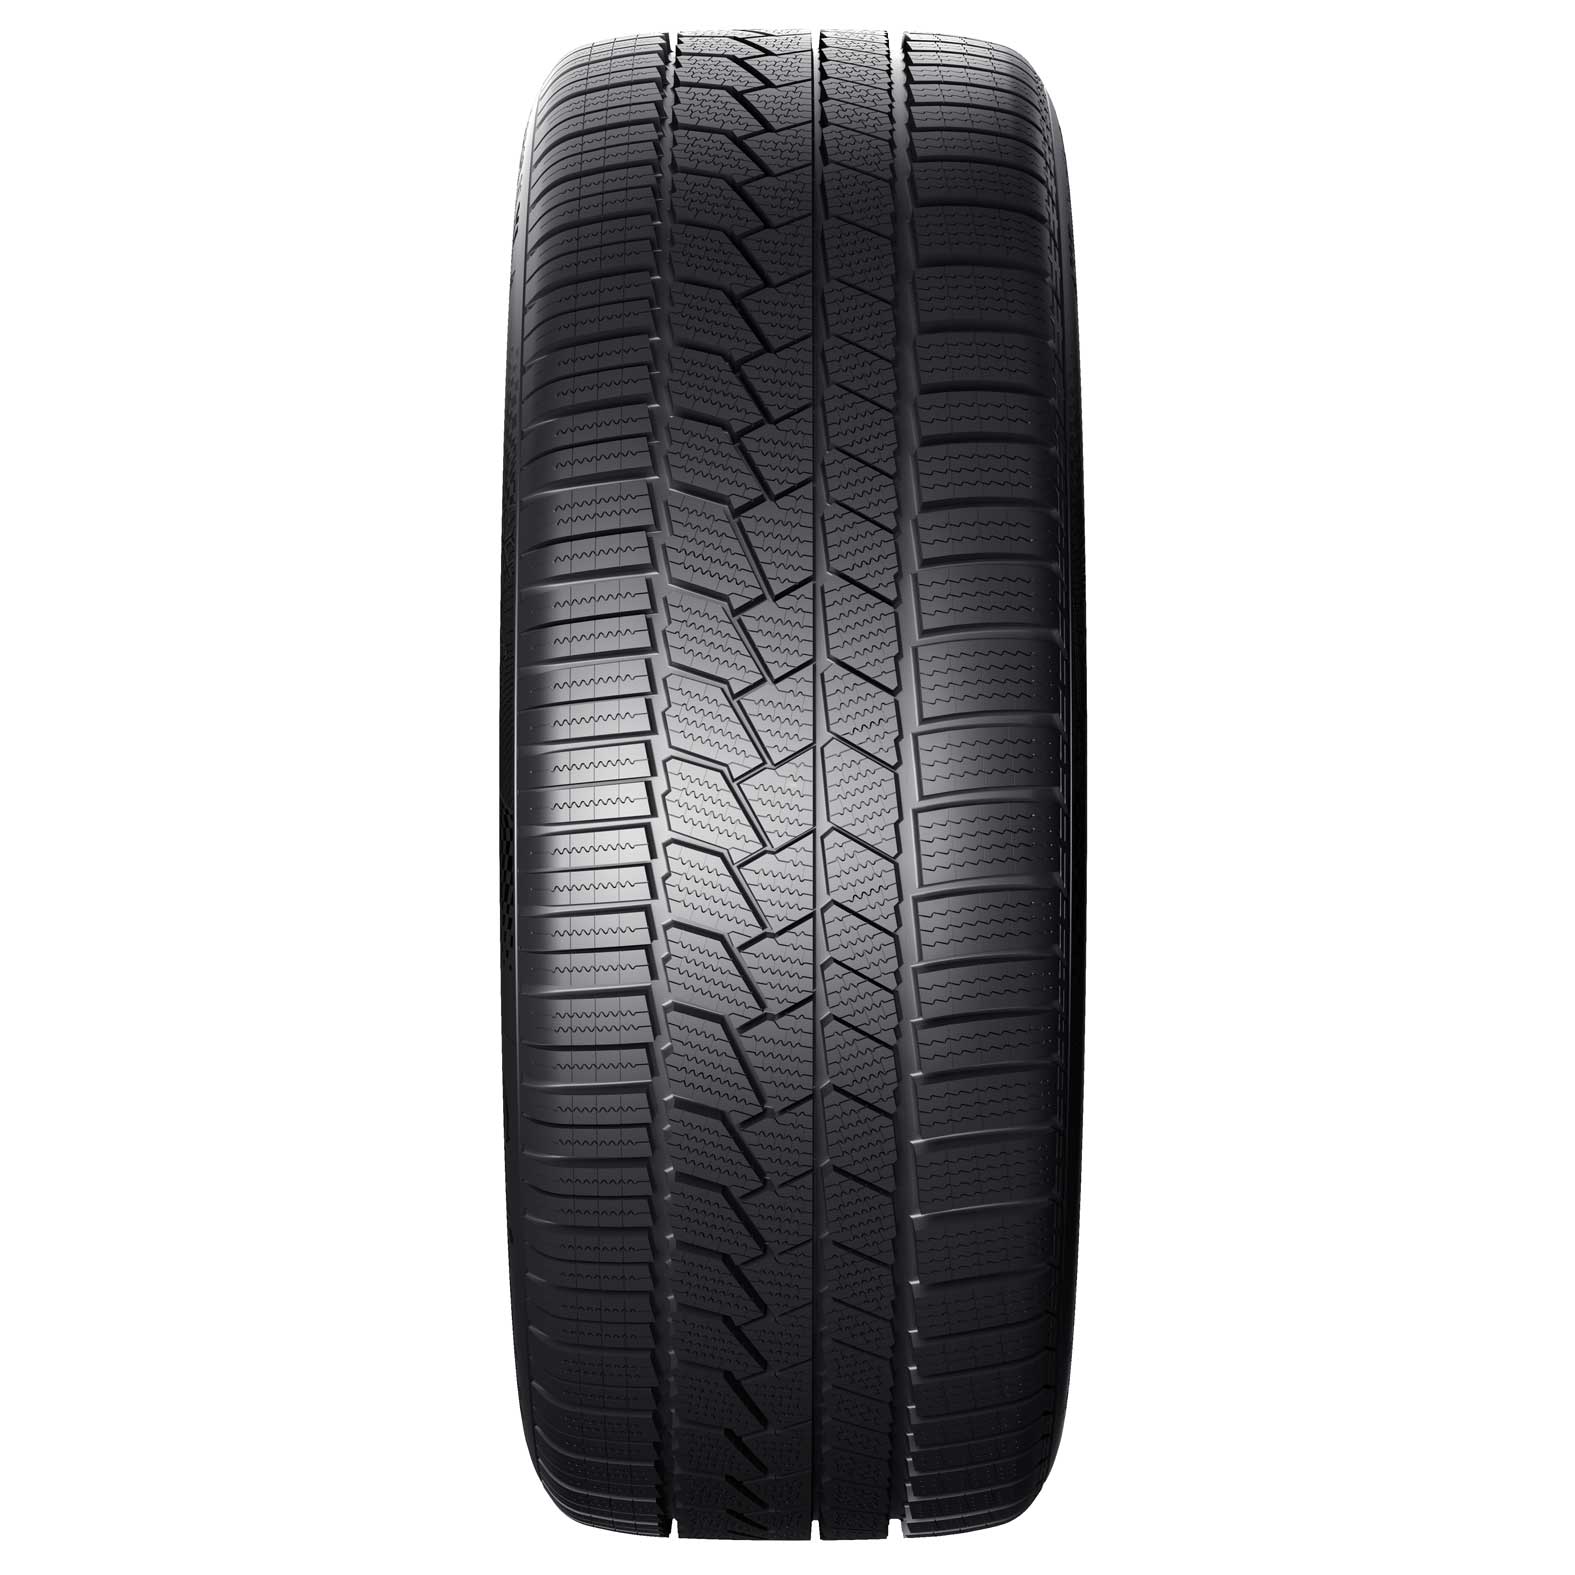 Continental WinterContact TS860 S Tires Kal | for Winter Tire